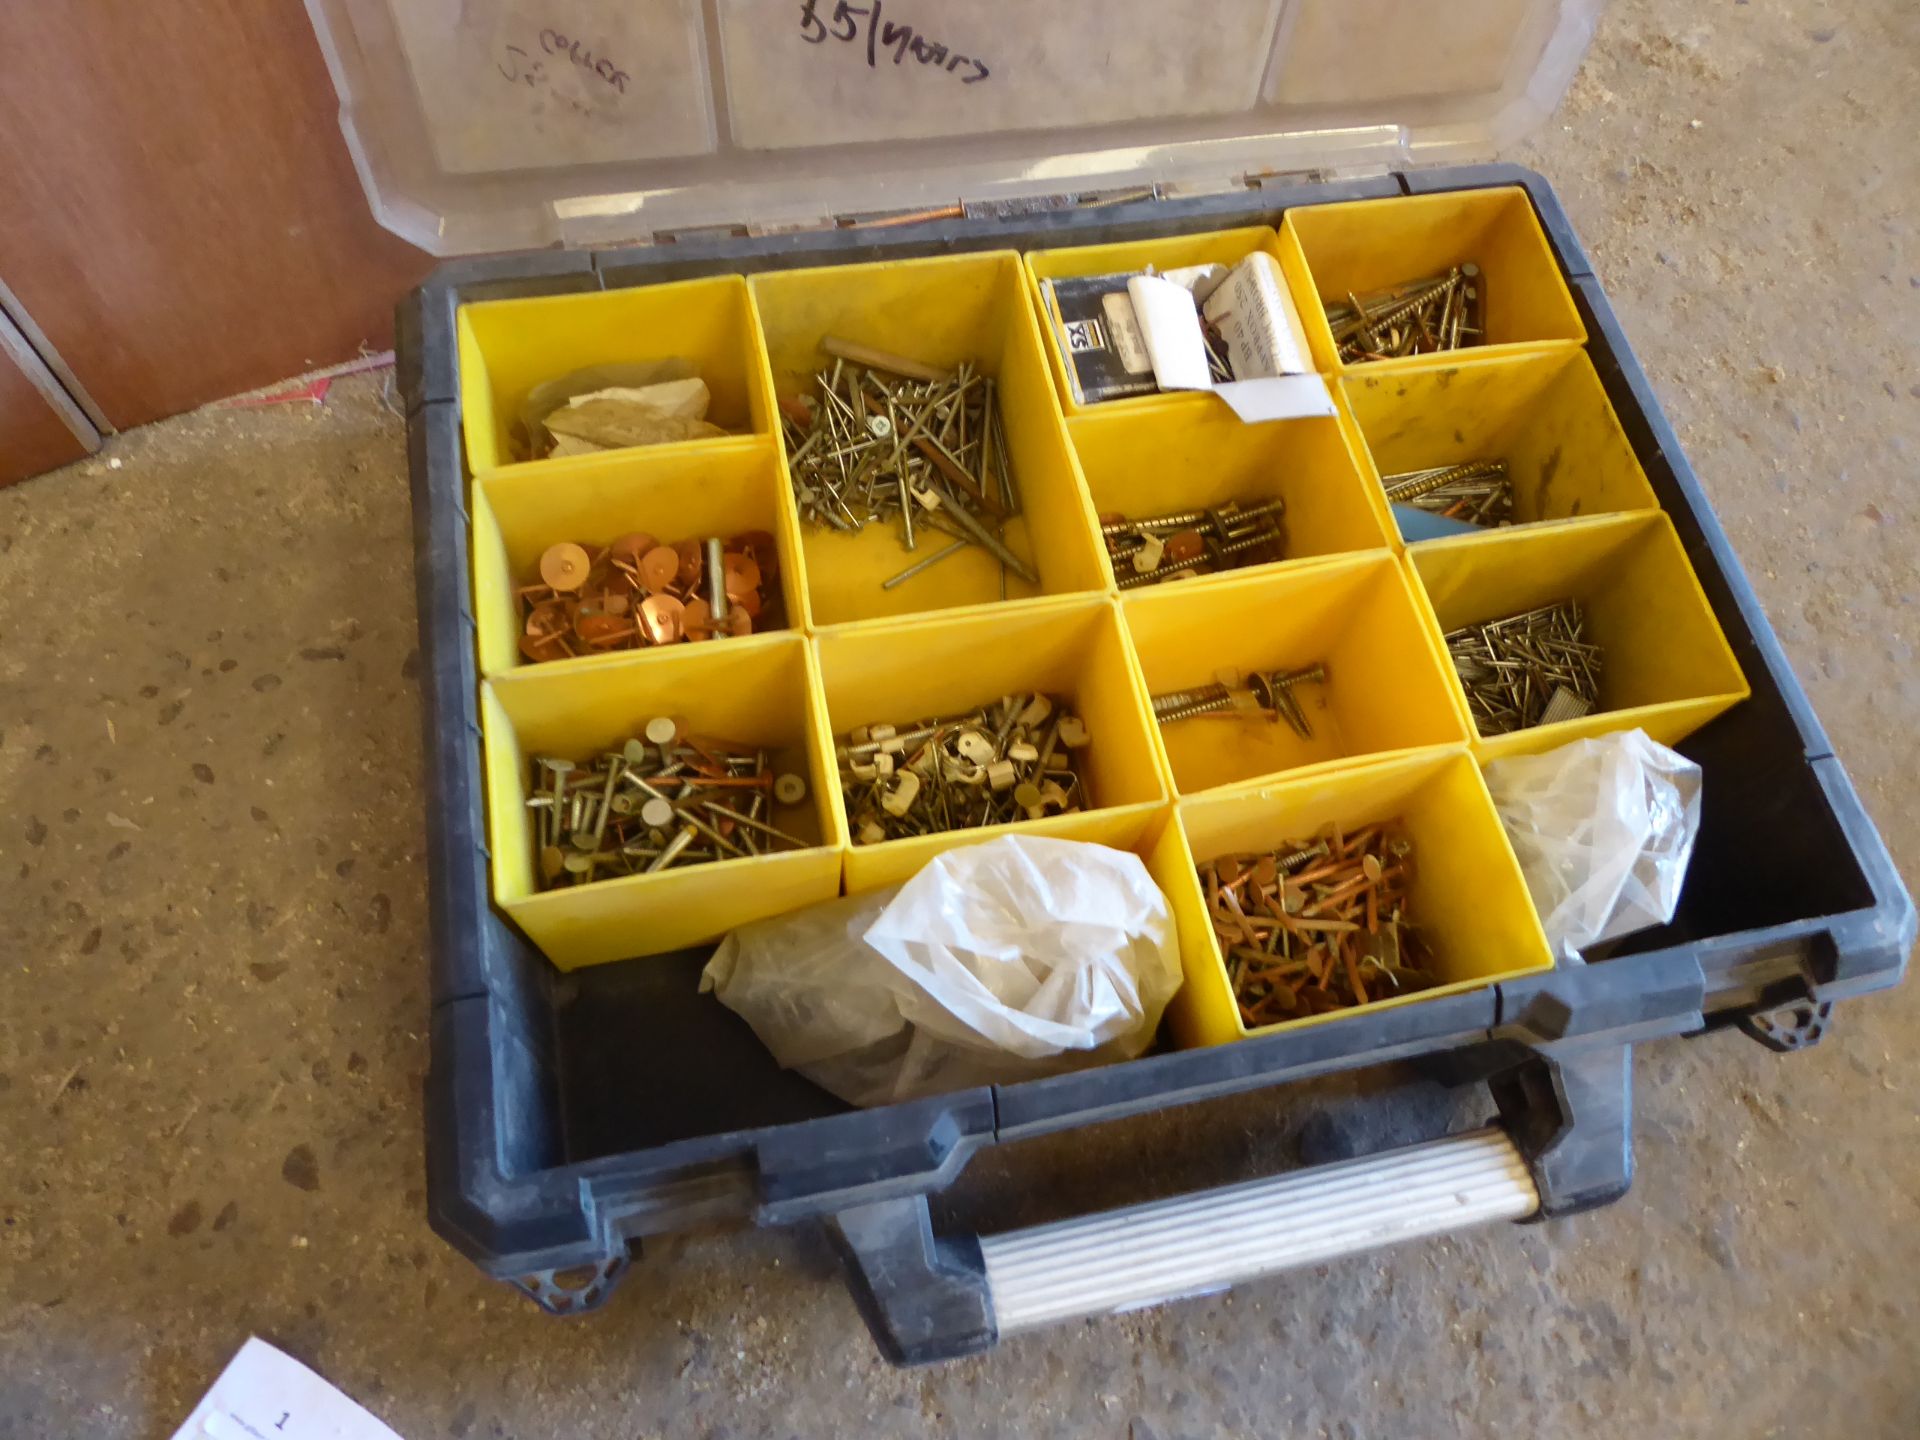 * Stanley organiser box and contents